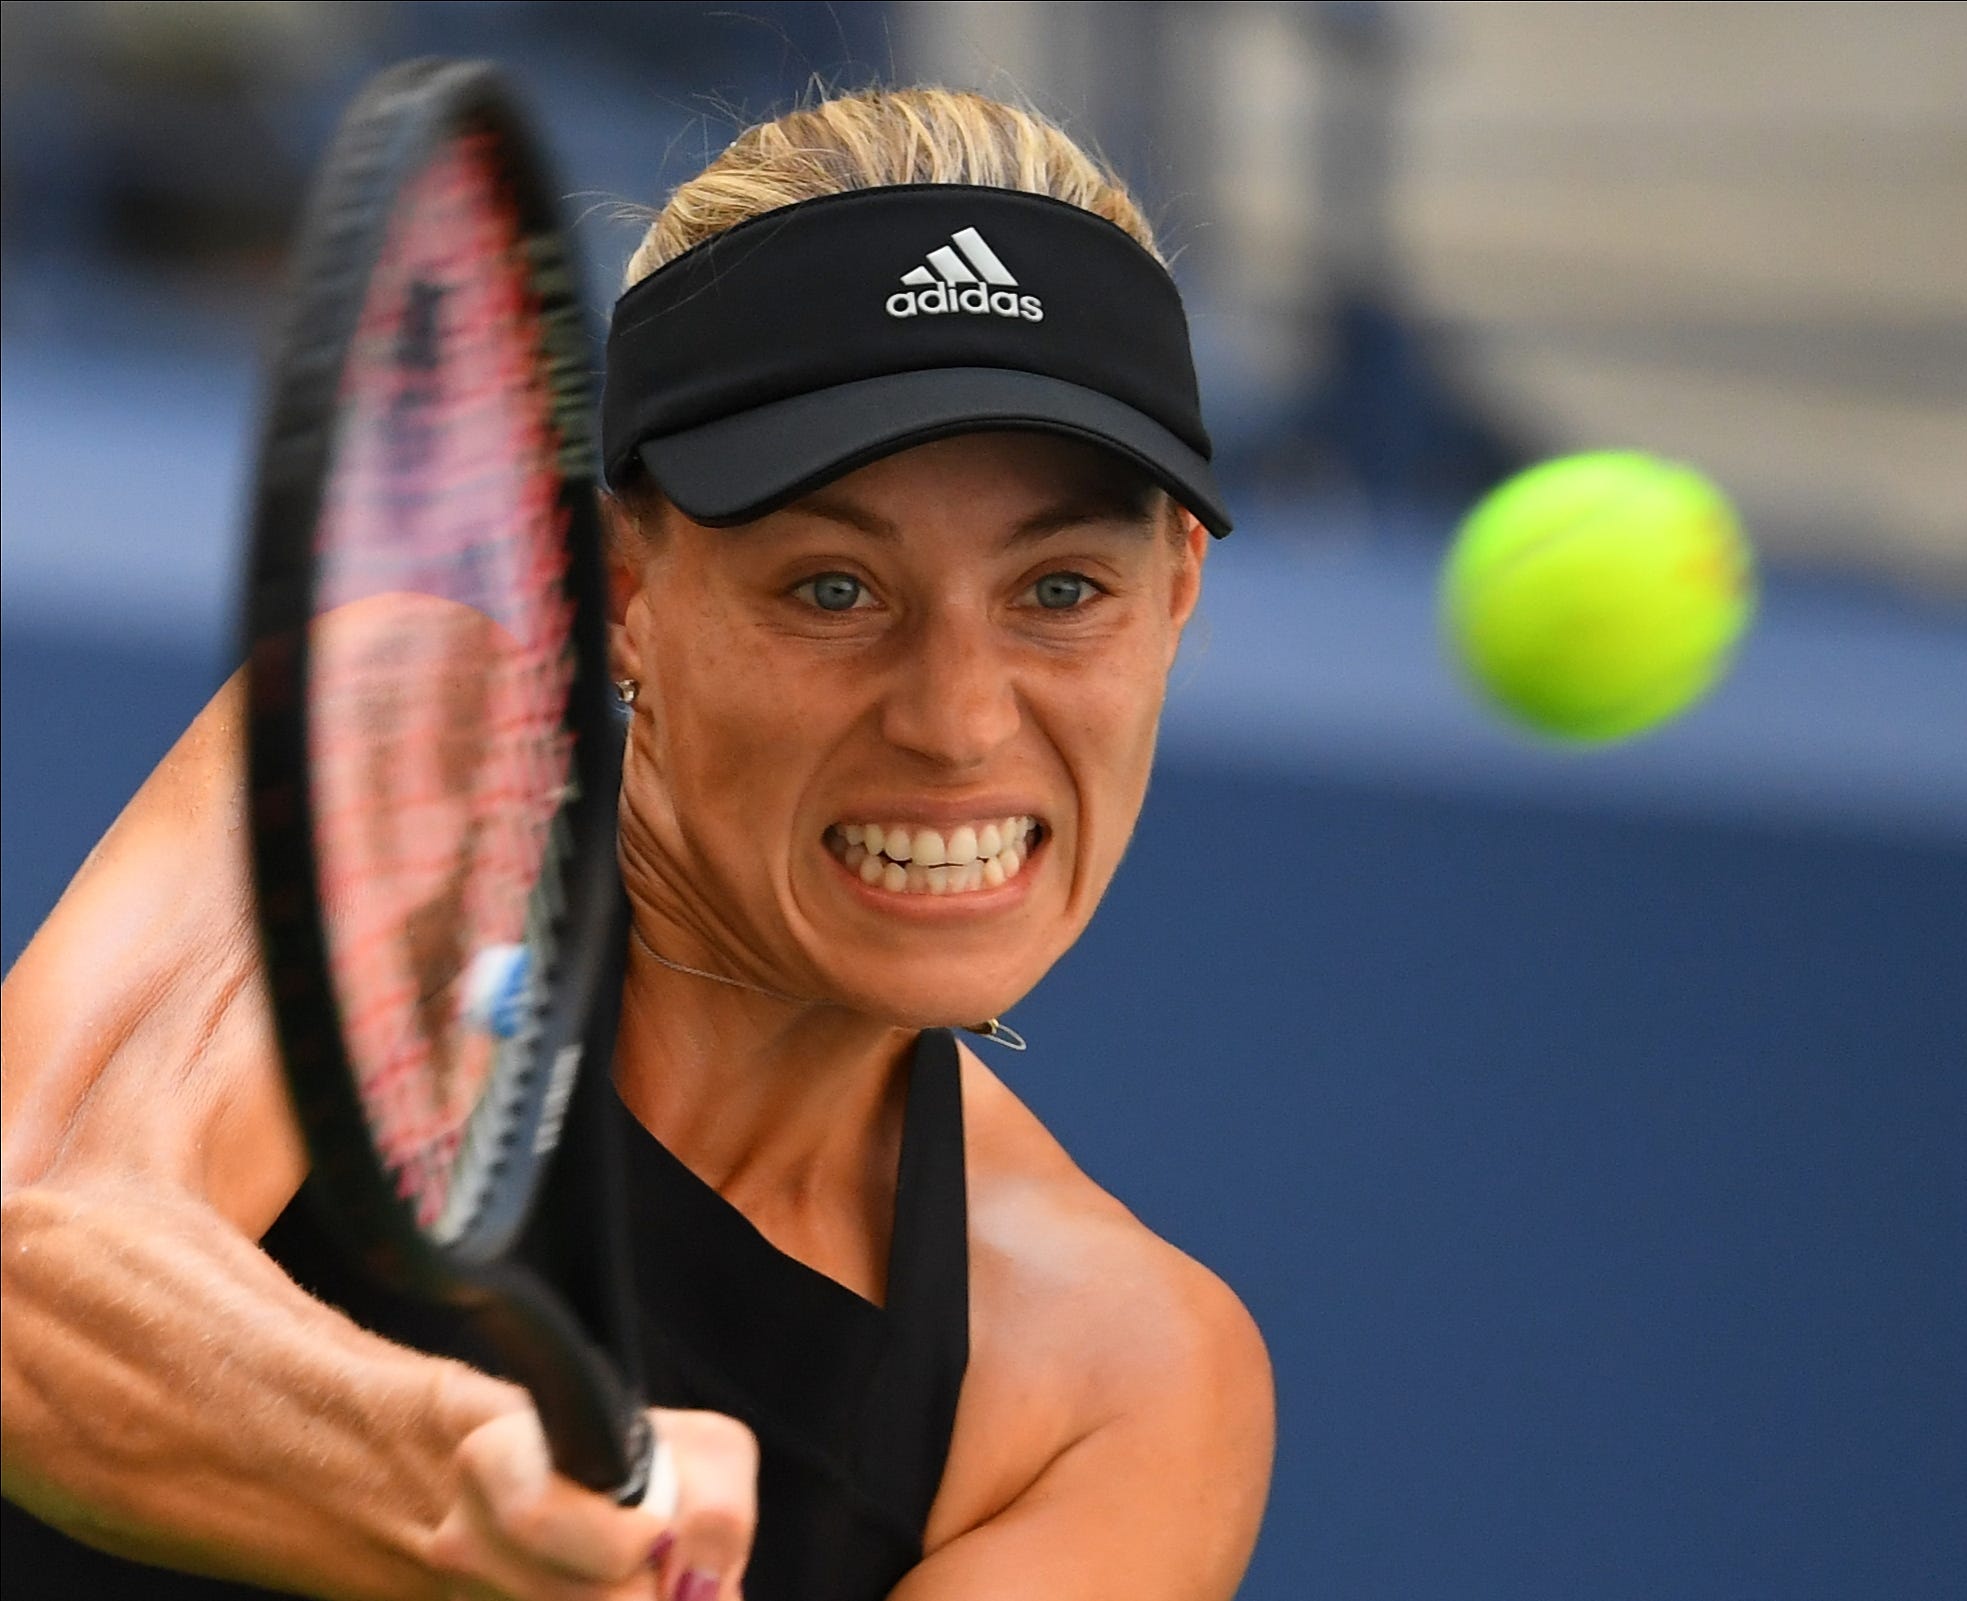 Angelique Kerber of Germany hits to Johanna Larsson of Sweden in a second round match on day four of the 2018 U.S. Open tennis tournament at USTA Billie Jean King National Tennis Center in New York.